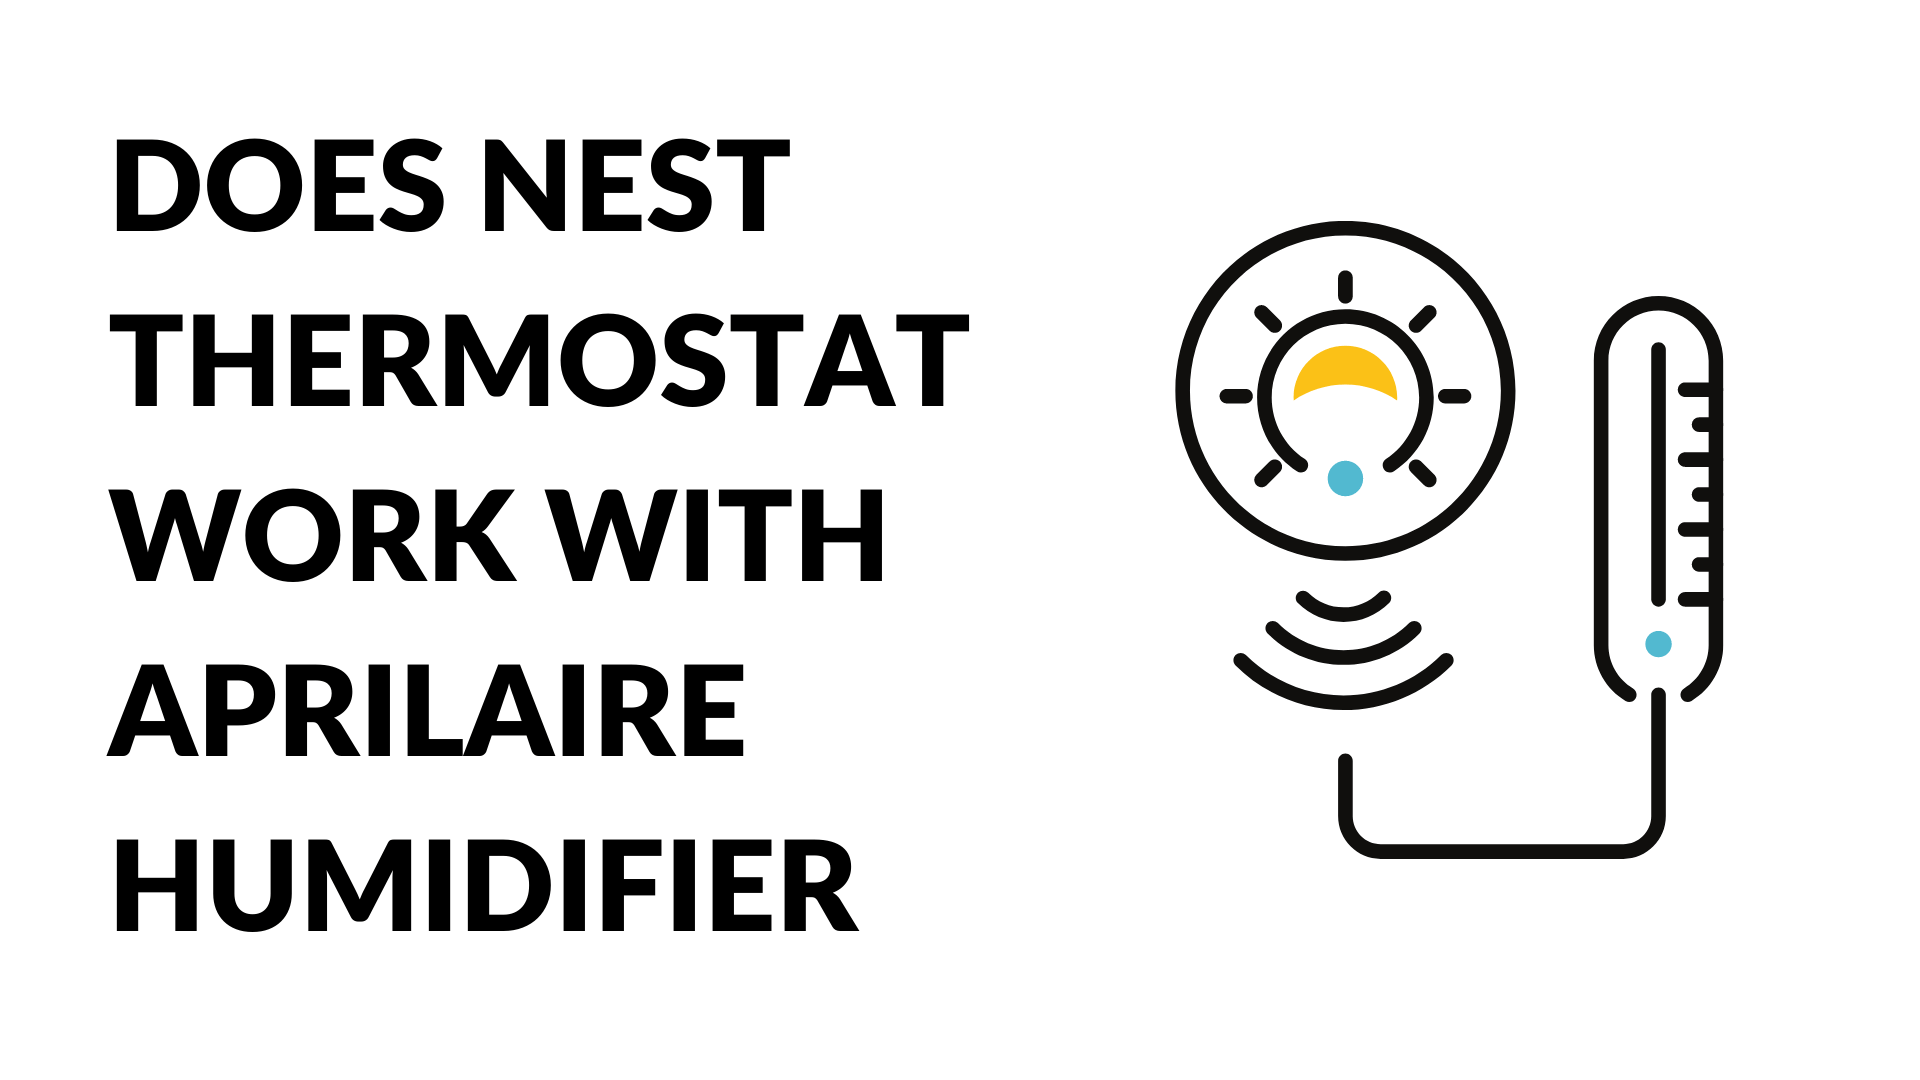 DOES NEST THERMOSTAT WORK WITH APRILAIRE HUMIDIFIER